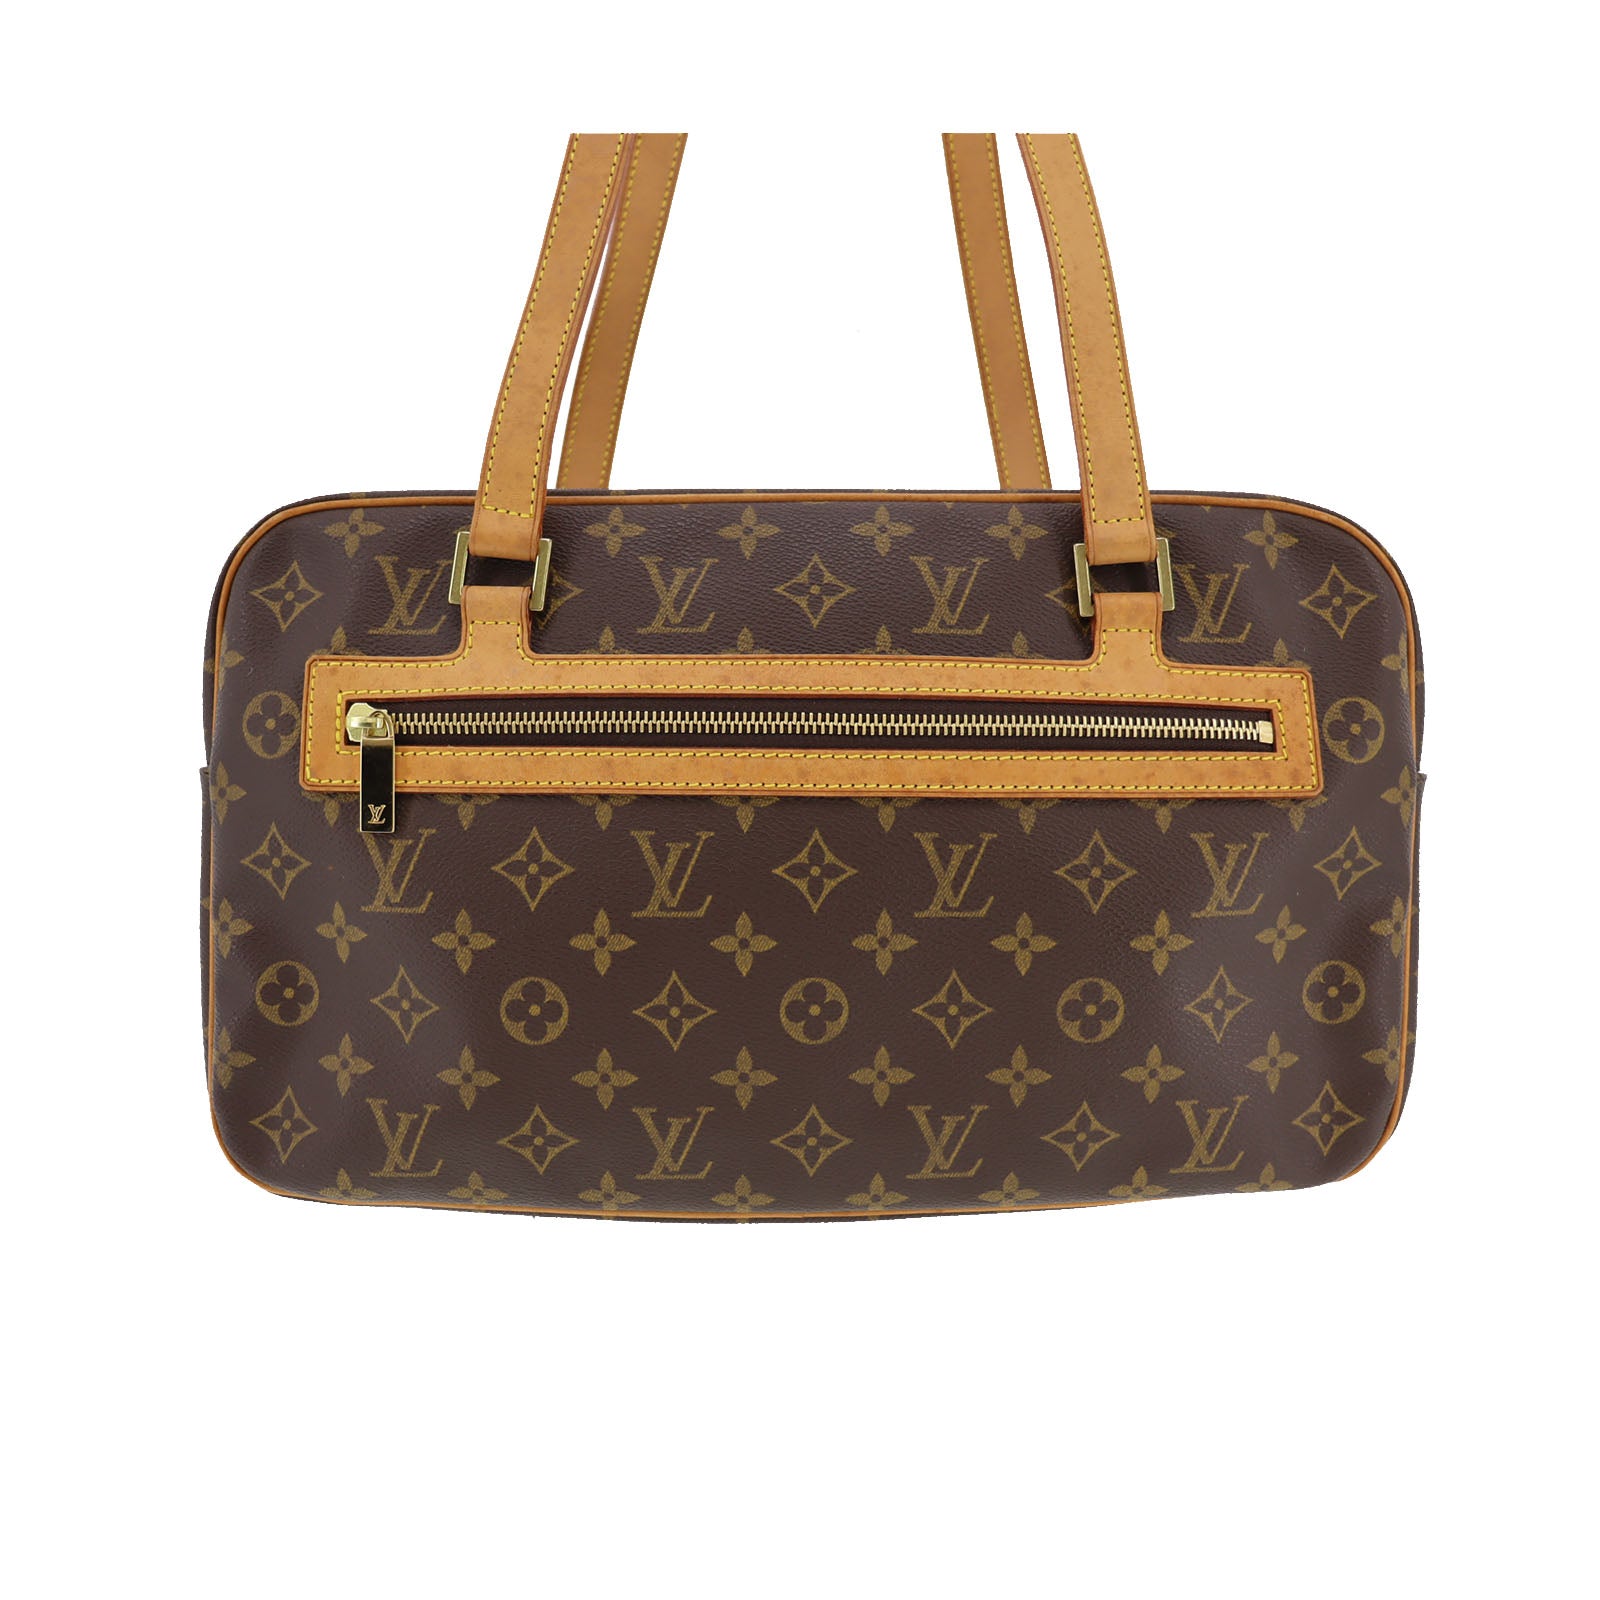 Buy Free Shipping LOUIS VUITTON LV Cite GM Monogram Shoulder Bag Brown  M51181 Cite Vuitton Back Used from Japan - Buy authentic Plus exclusive  items from Japan